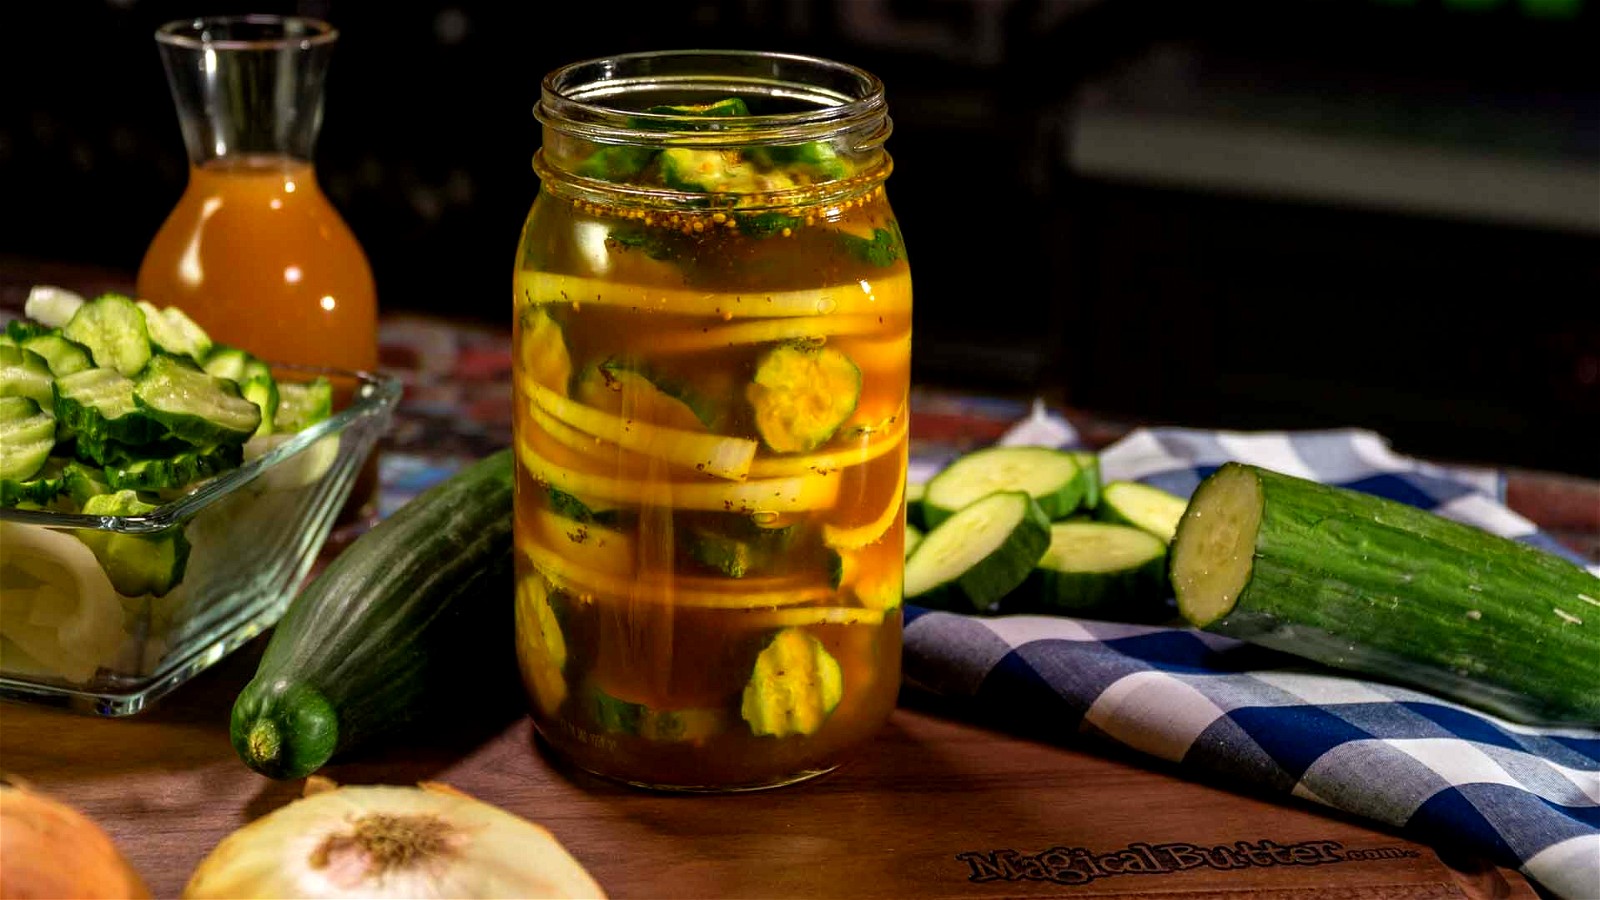 Image of Bread and Butter Pickles